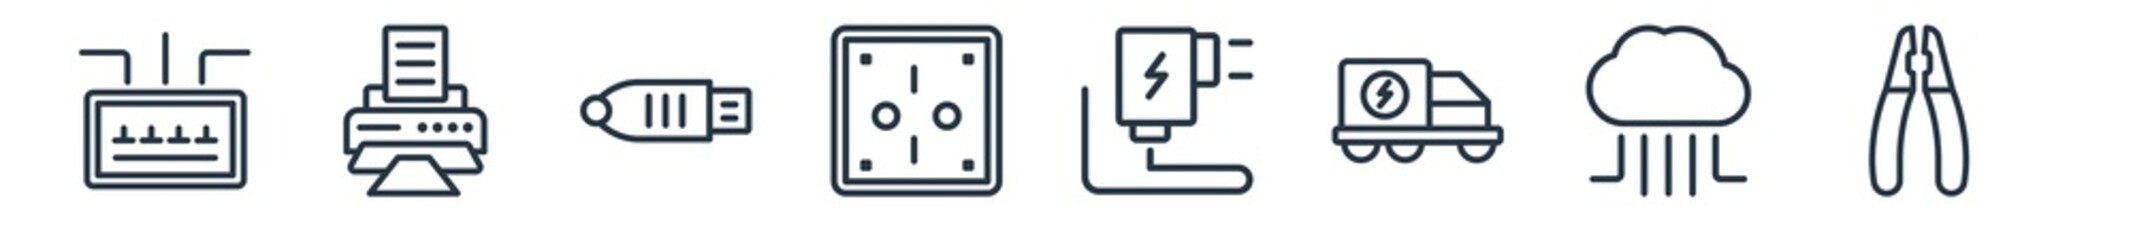 linear set of electrian connections outline icons. line vector icons such as fuse box, print, lan, wall socket, charger, pliers vector illustration.